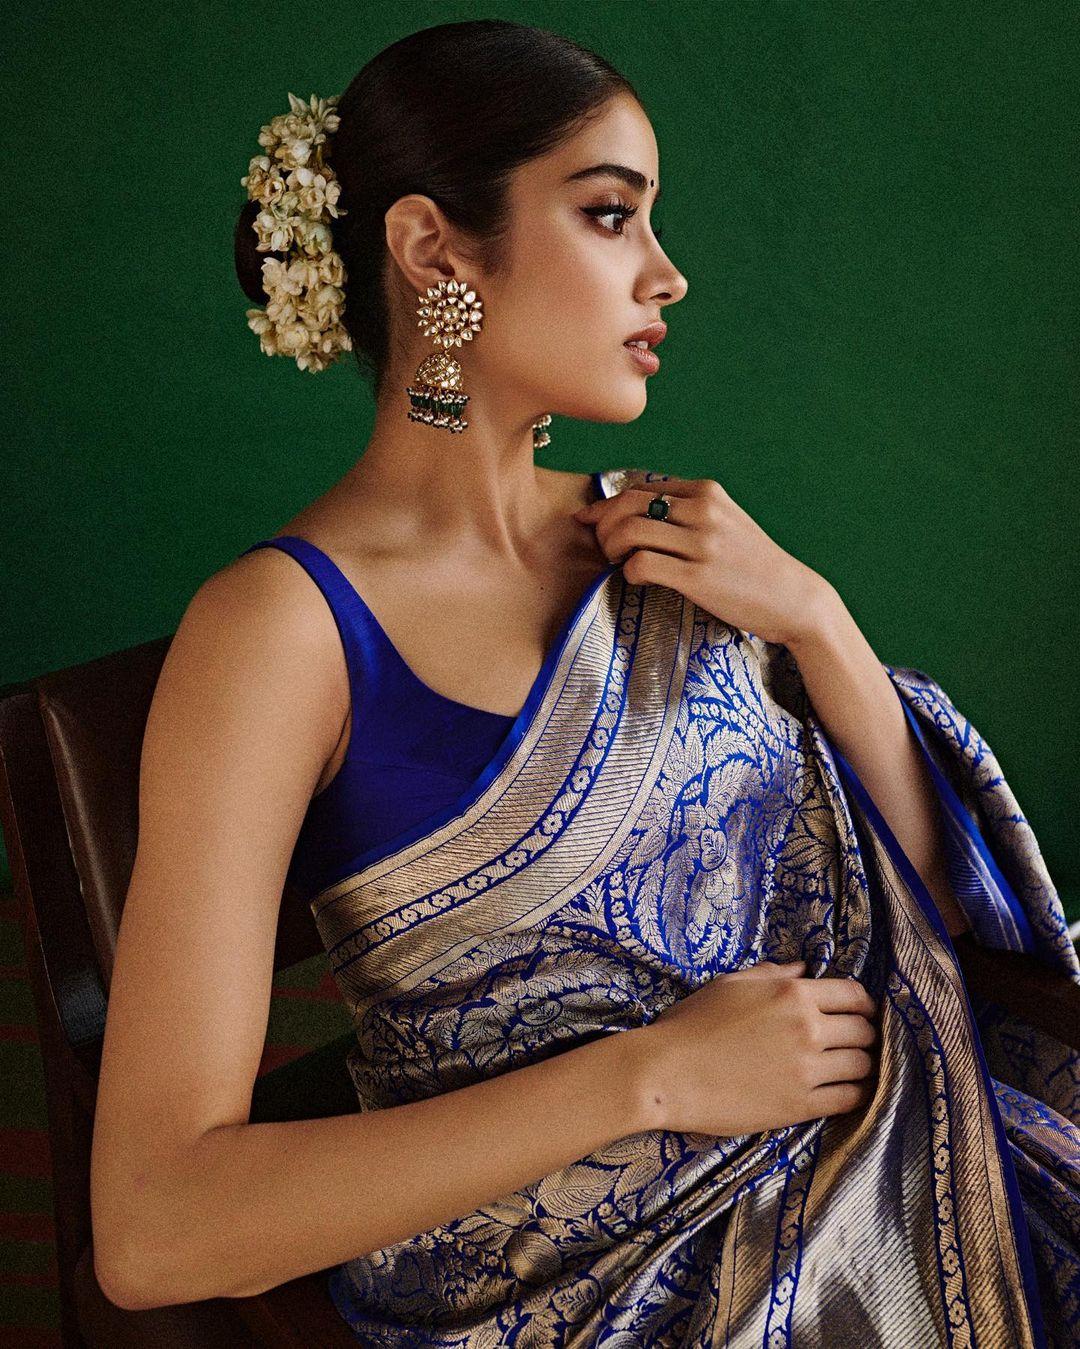 With winged eyeliner, subtle eye shadow, and a nude lip to complete her makeup, Janhvi Kapoor embodies the essence of Navami fashion sophistication.